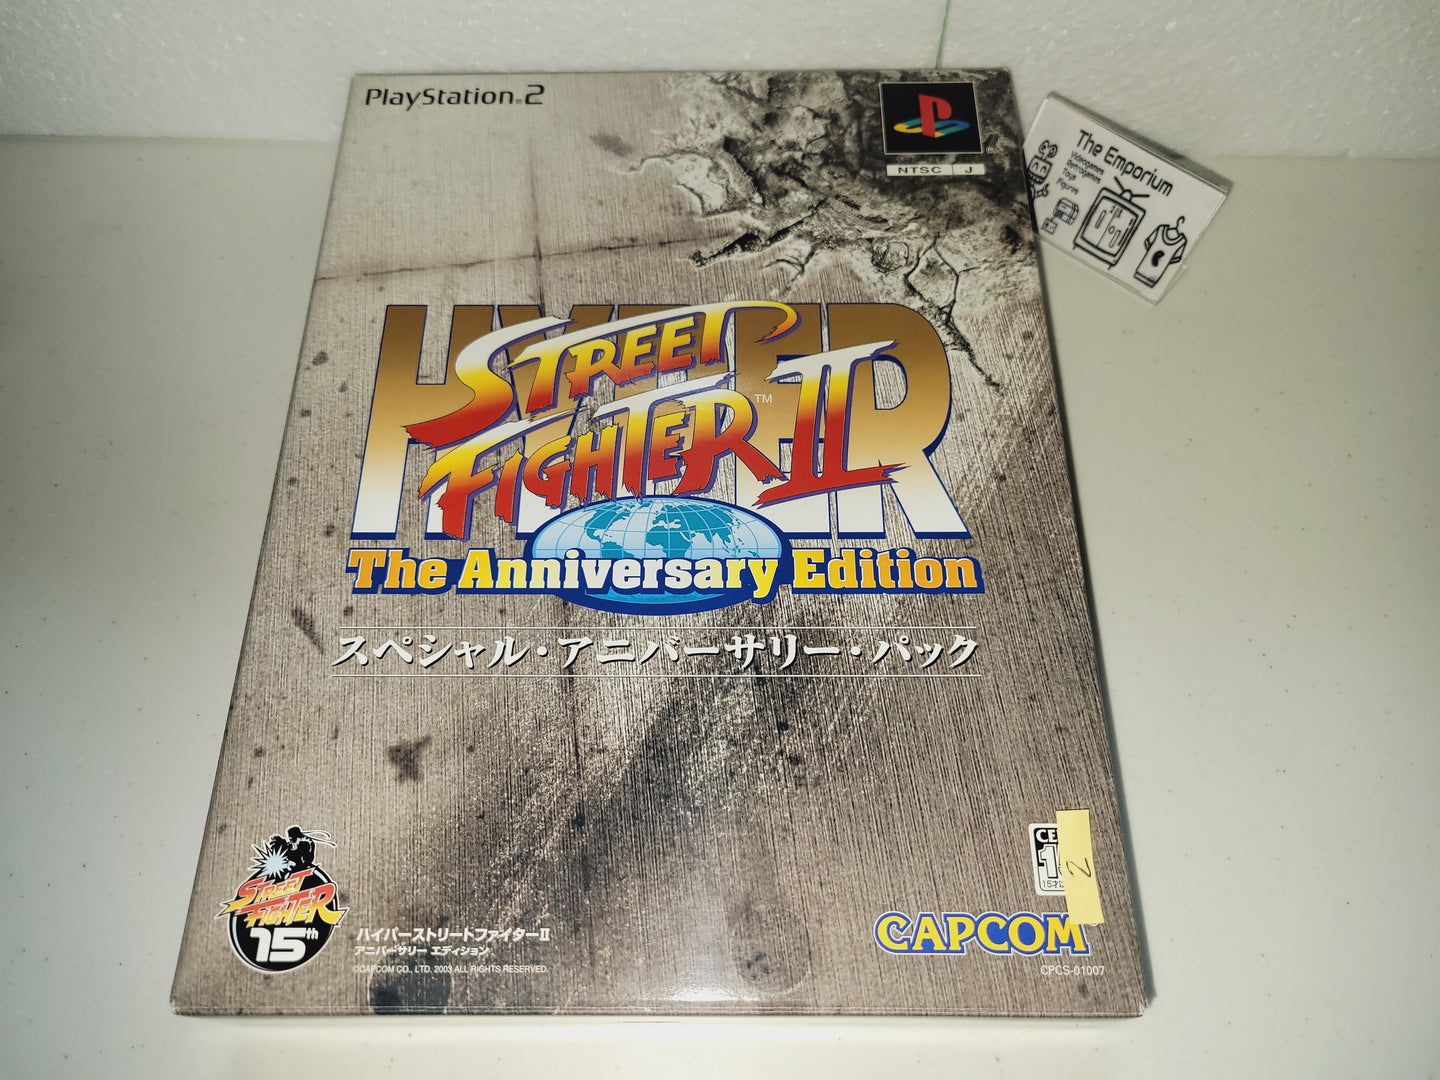 Hyper Street Fighter II: The Anniversary Edition [Special Anniversary Pack] - Sony playstation 2